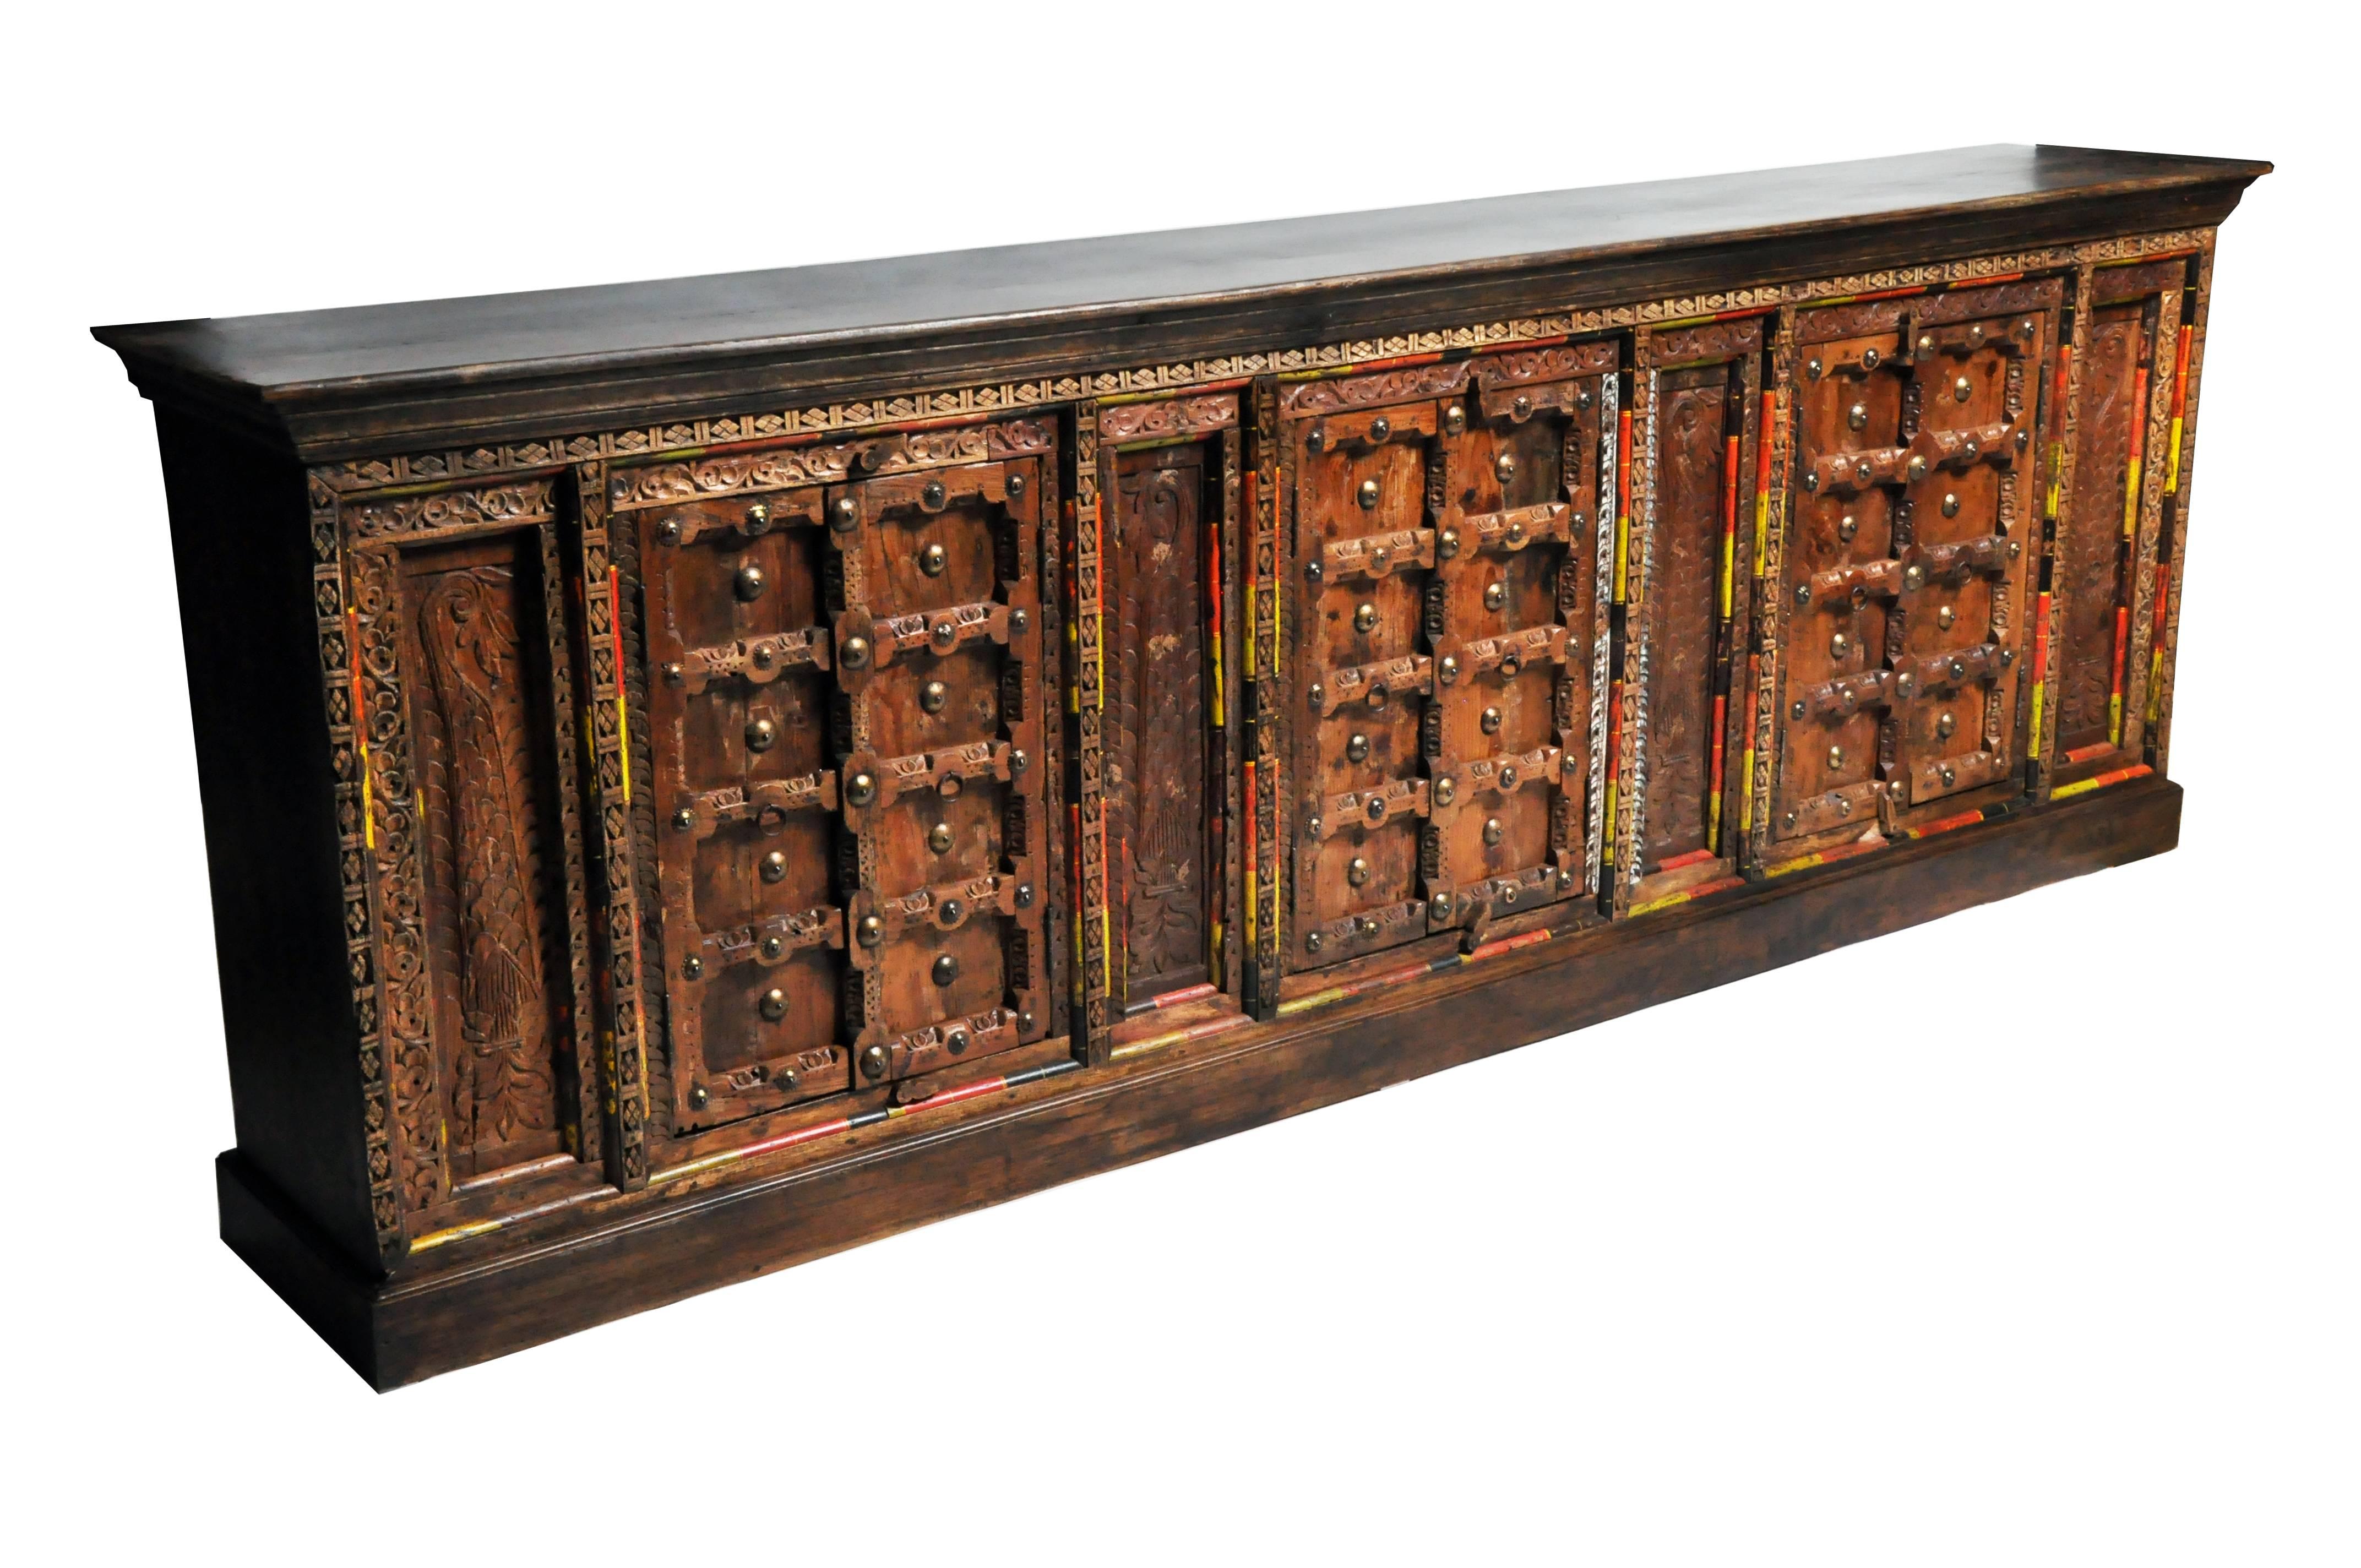 Hardwood Impressive Indian Sideboard with Beautiful Colors and Carvings